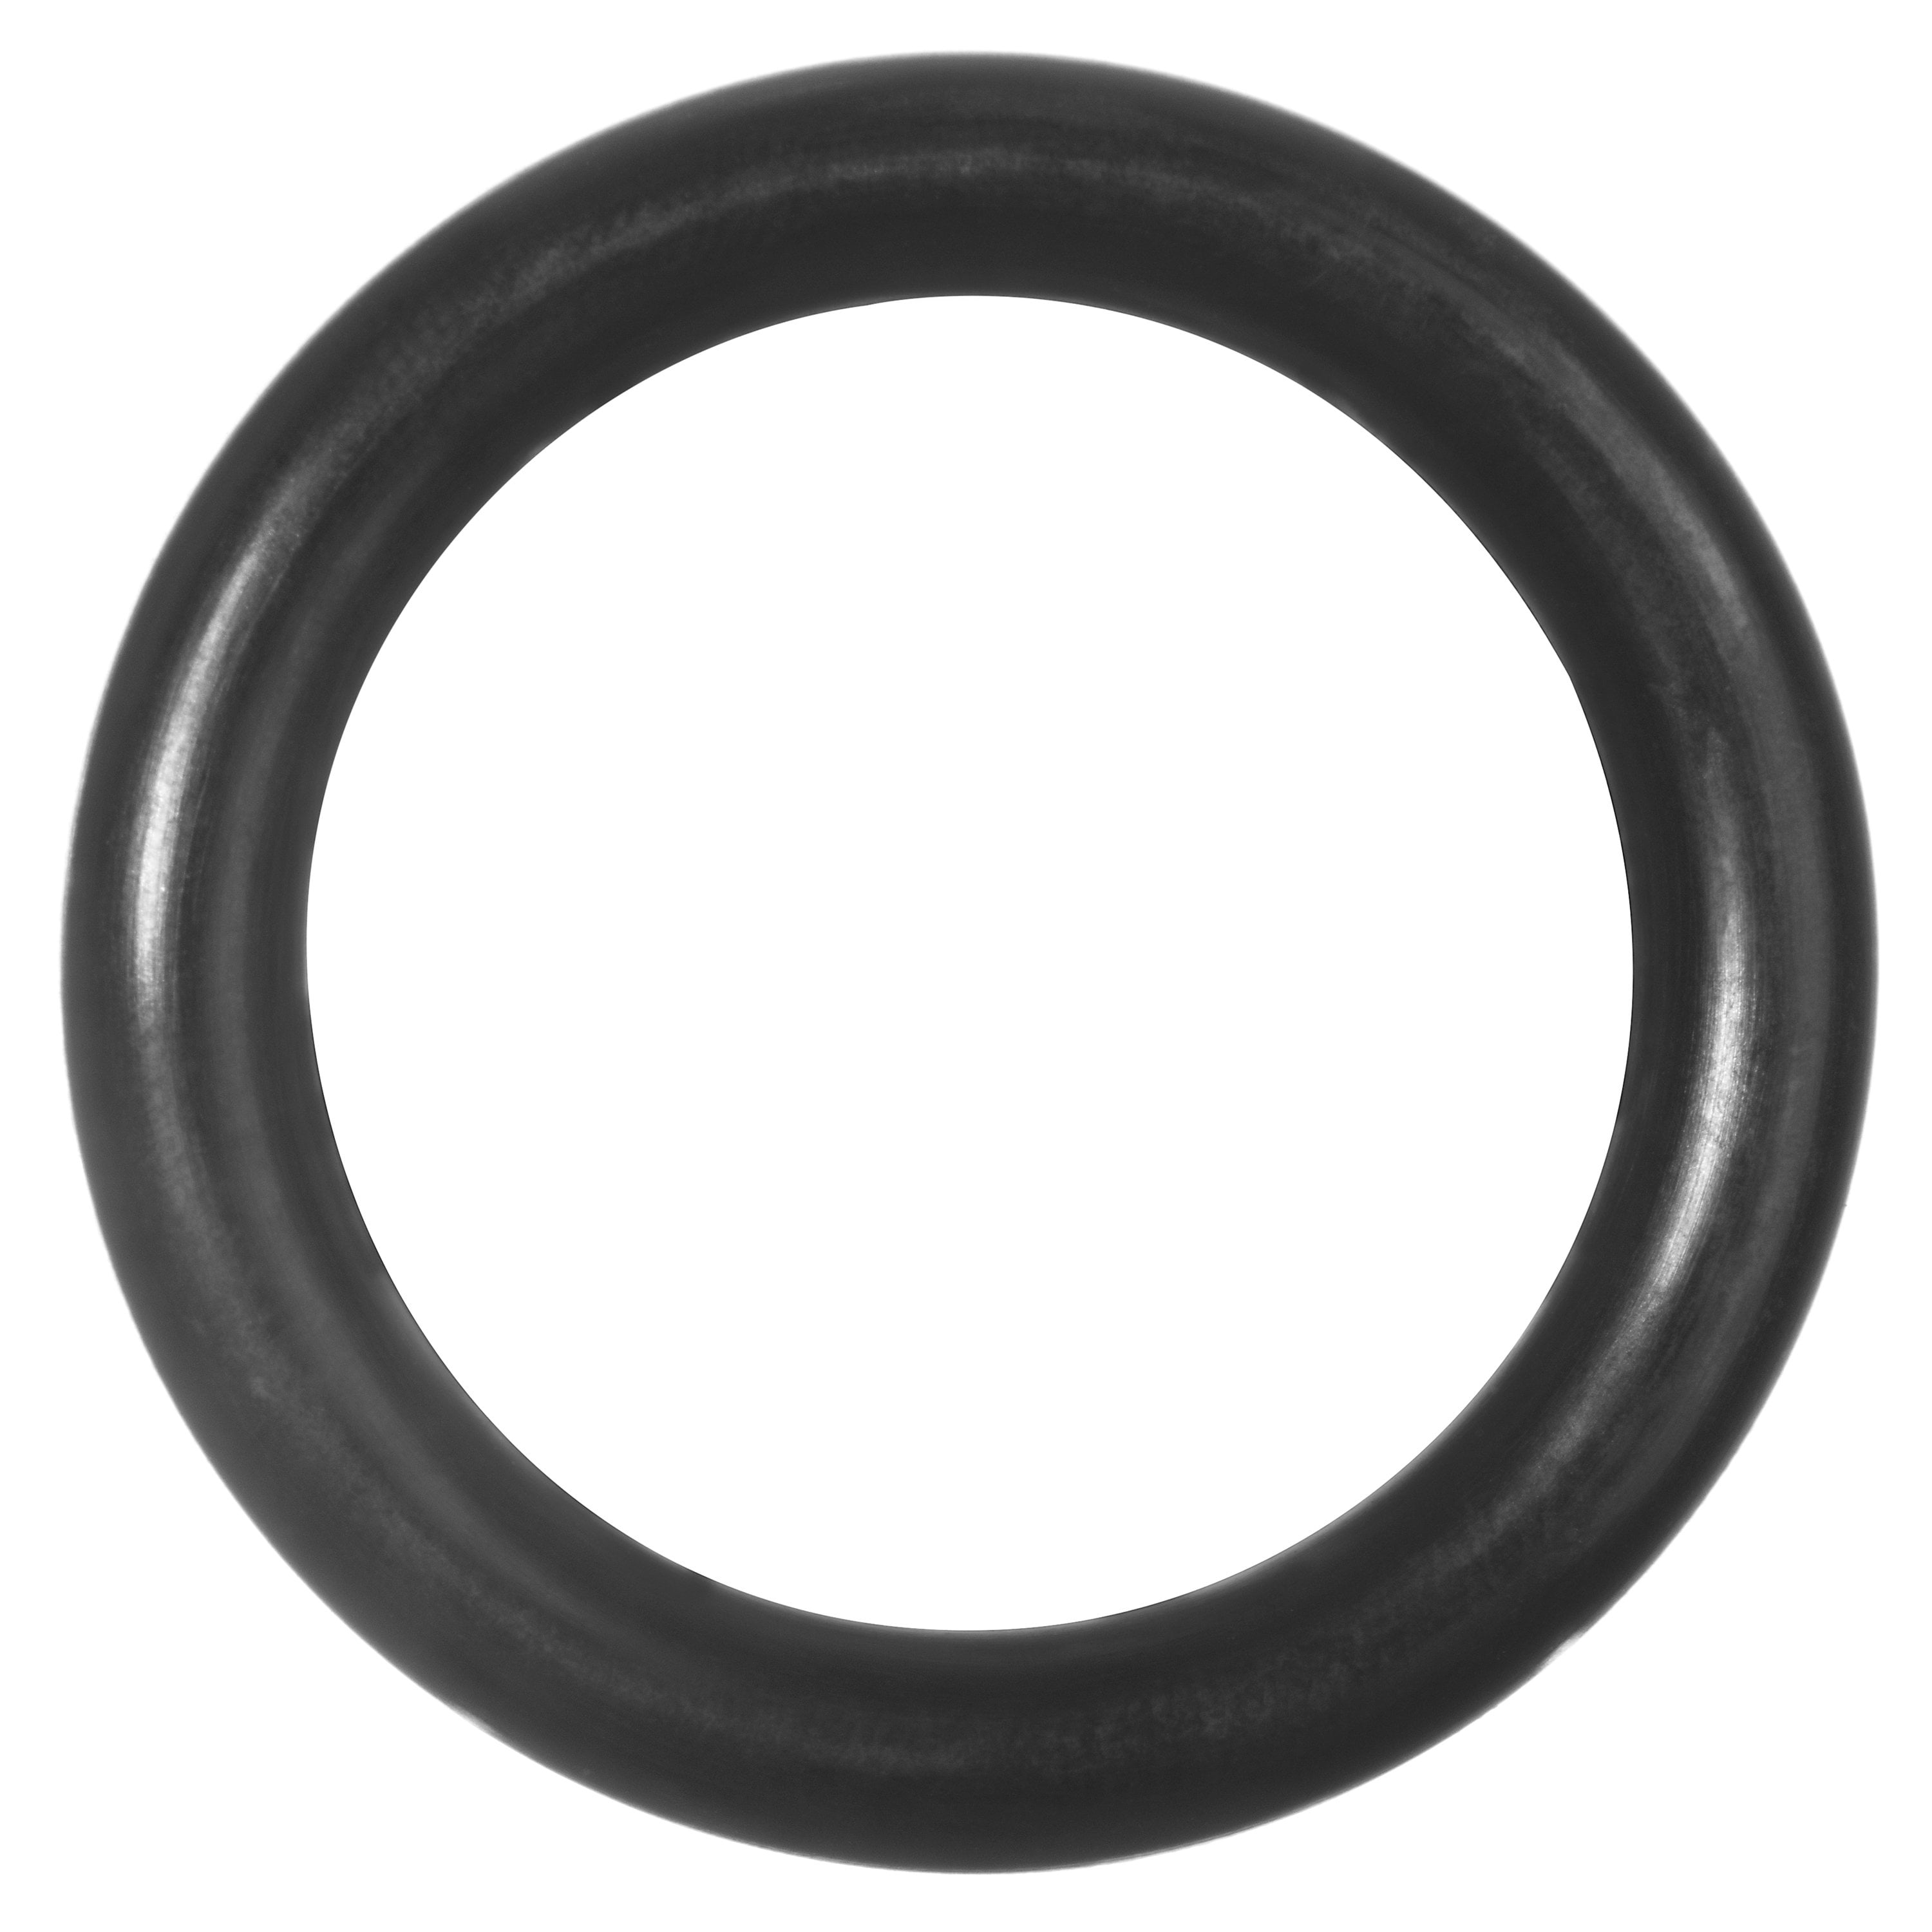 Viton O-Ring - 1.5mm Wide 8mm ID - Pack of 25